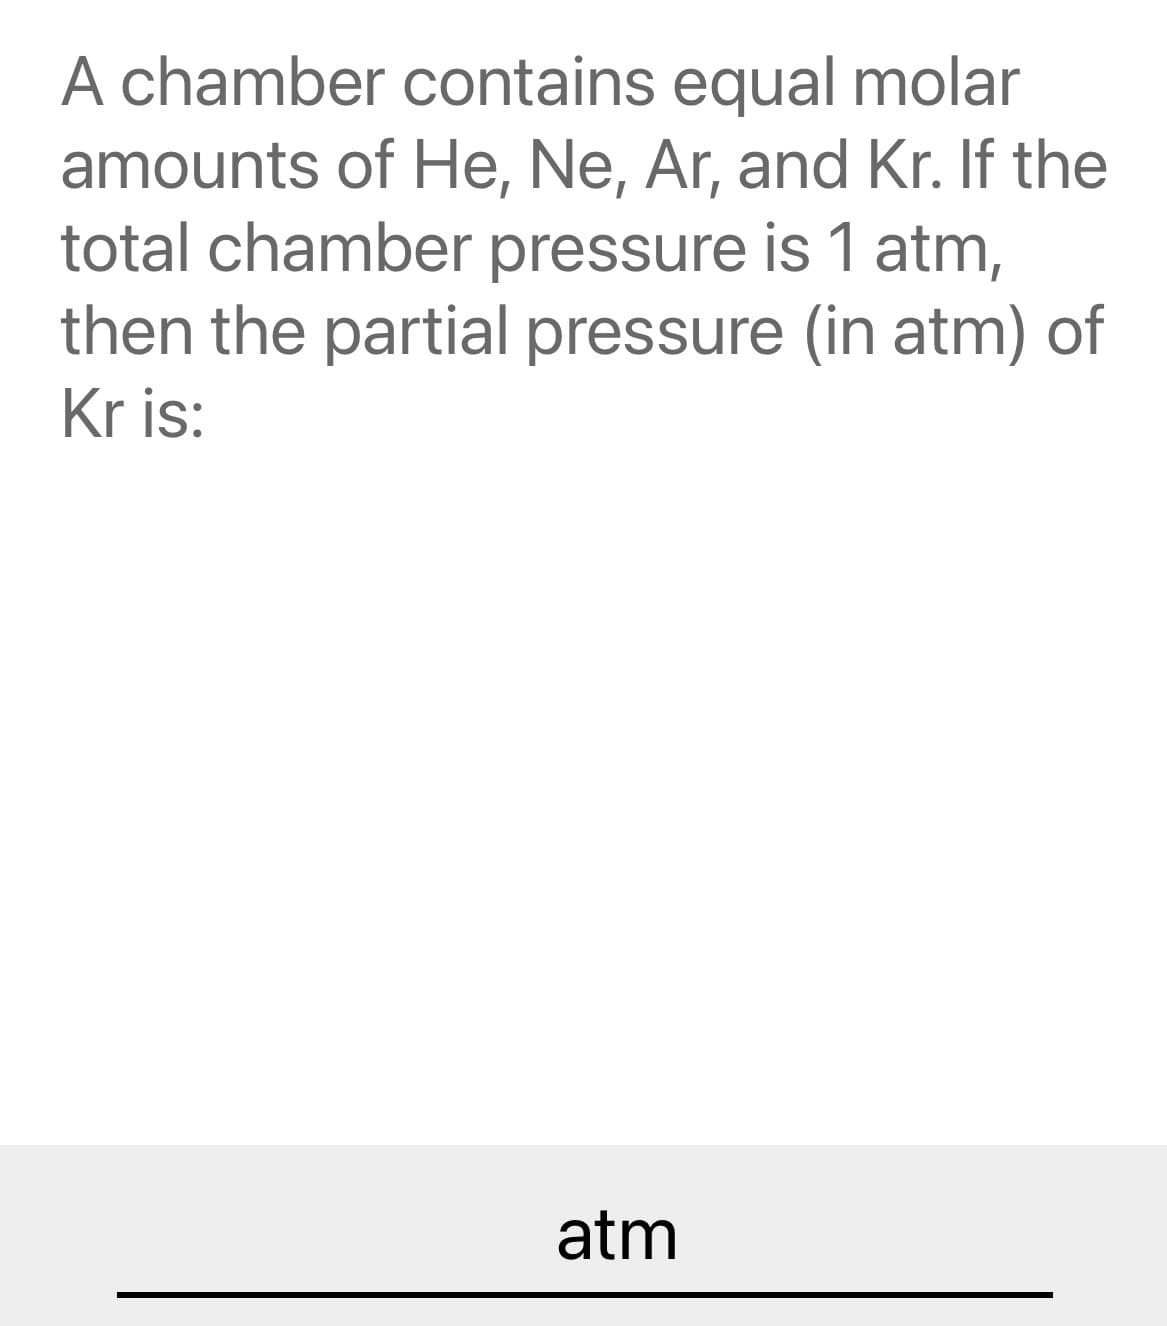 A chamber contains equal molar
amounts of He, Ne, Ar, and Kr. If the
total chamber pressure is 1 atm,
then the partial pressure (in atm) of
Kr is:
atm